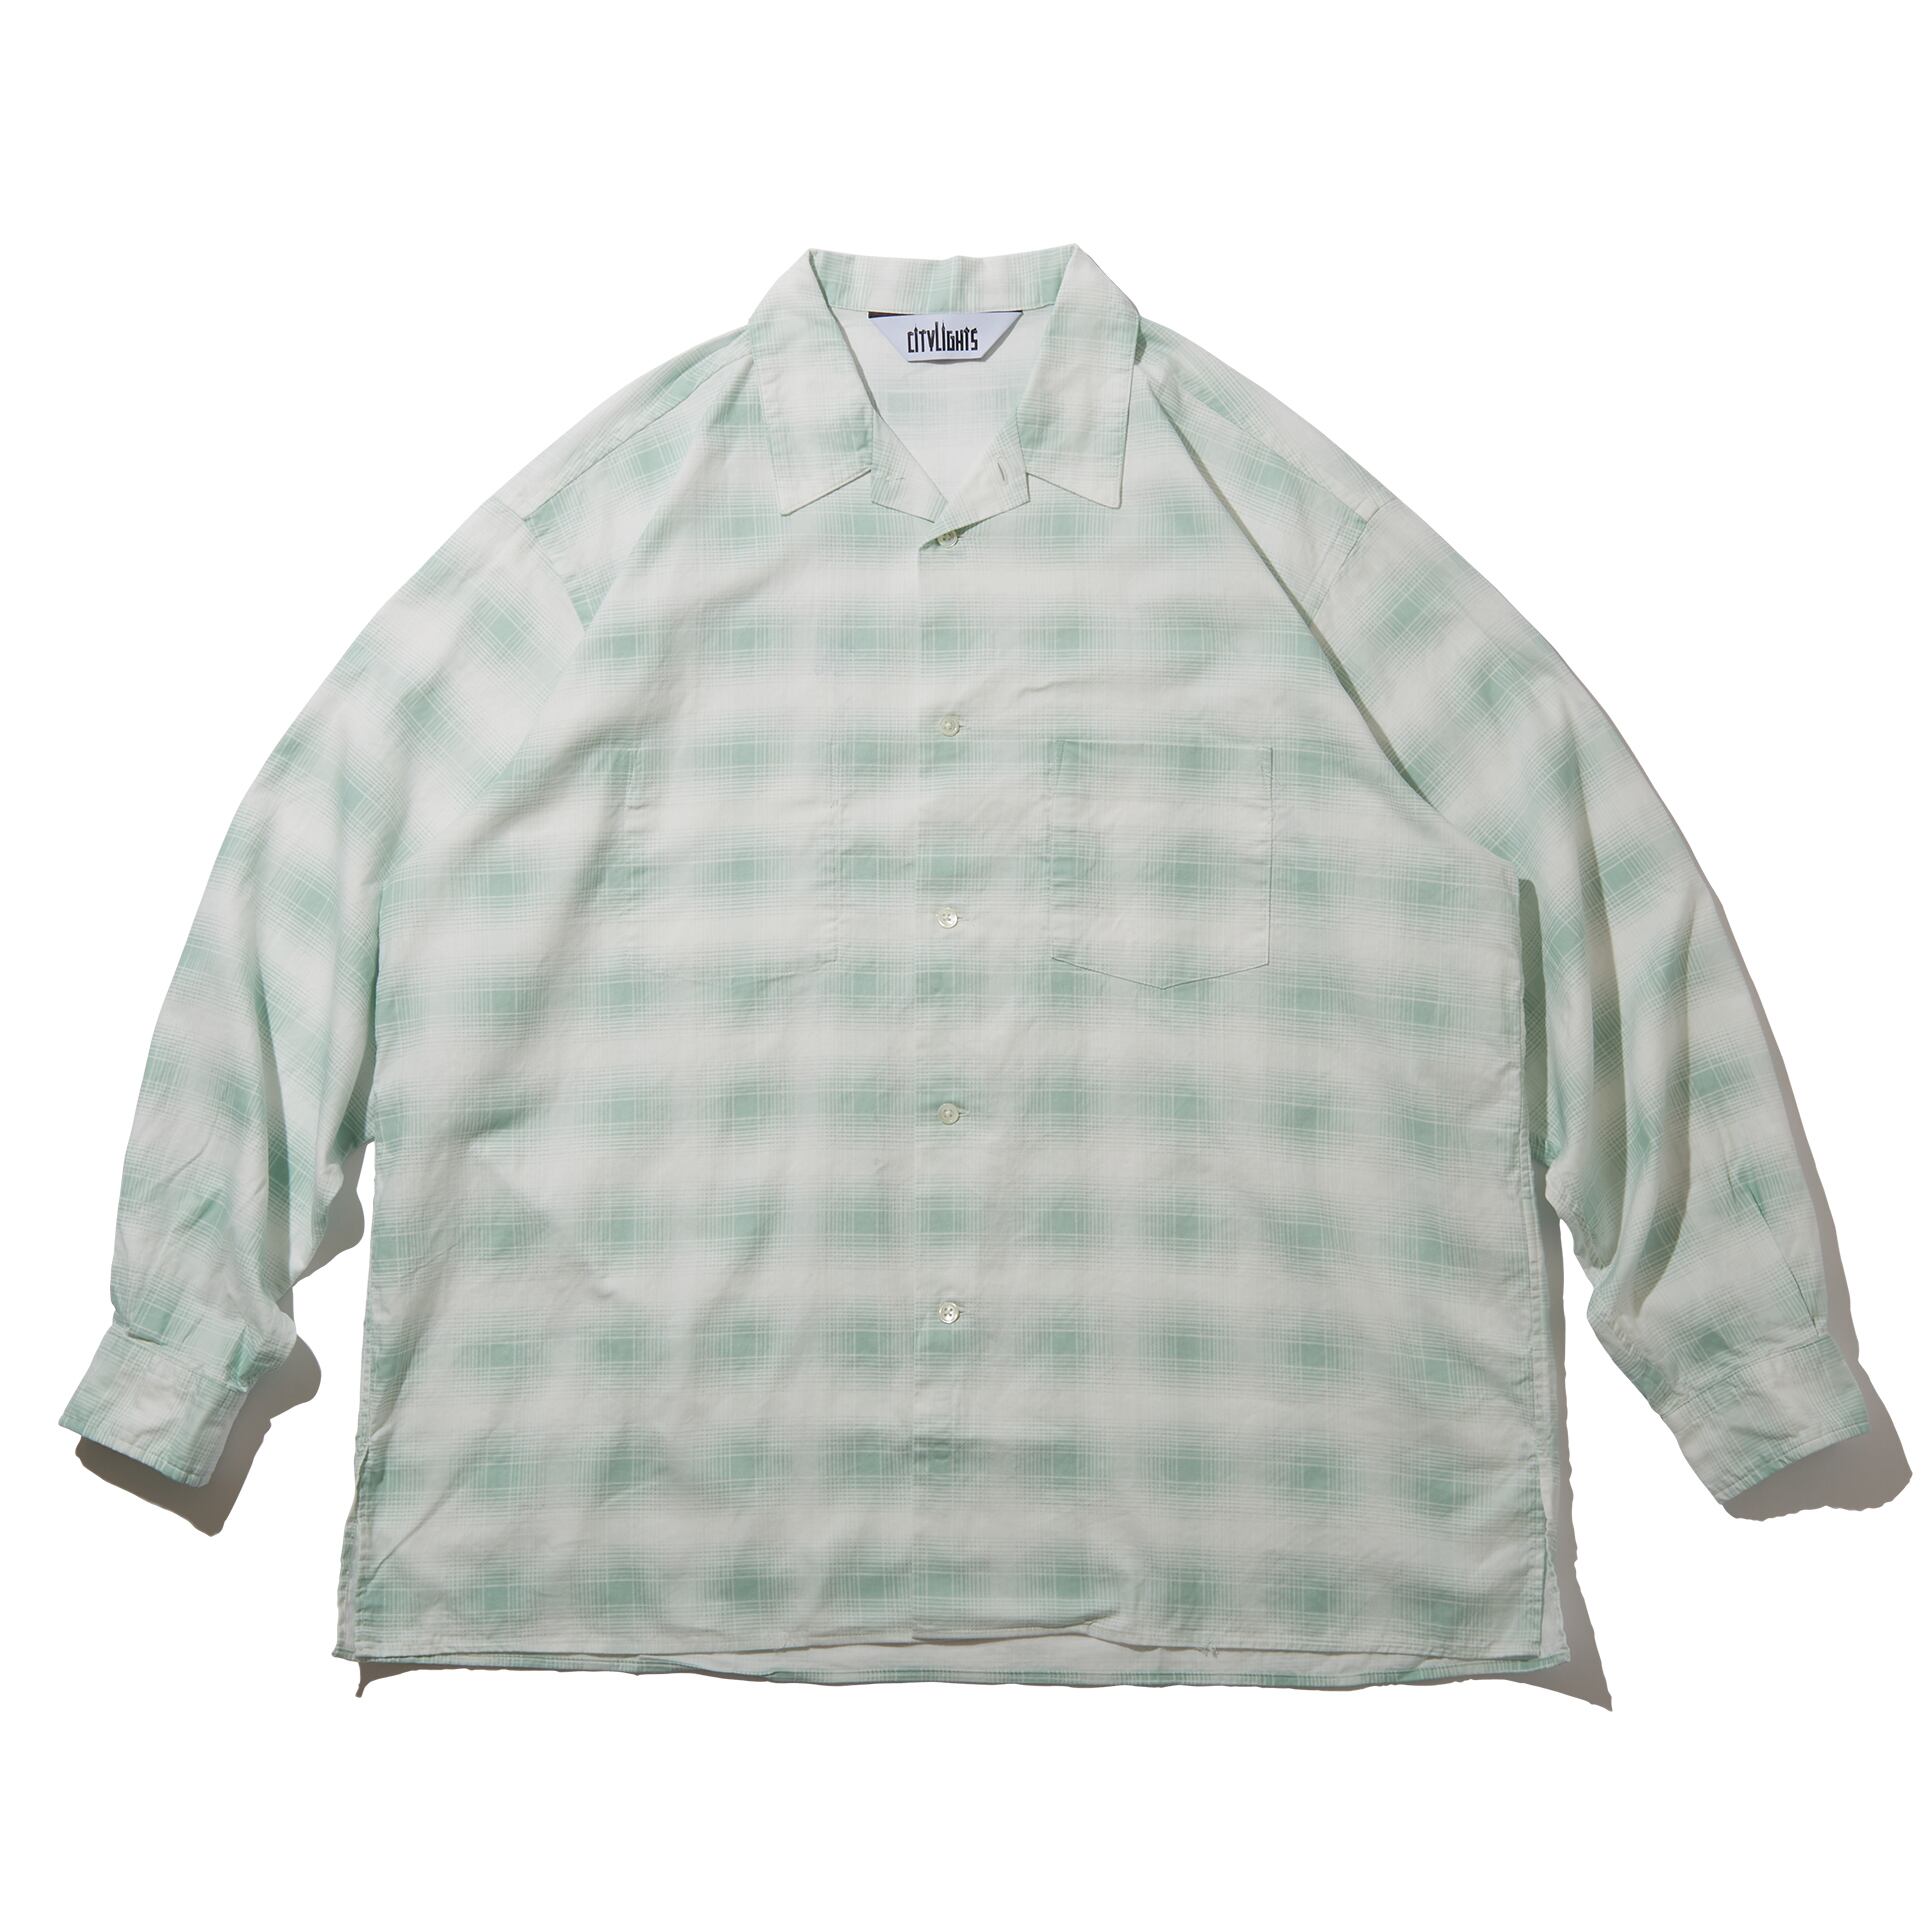 Name:DULL COLLAR SHIRT | Color:Sage Ombre | Size:Regular/Tall 【CITYLIGHTS PRODUCTS_シティライツプロダクツ】